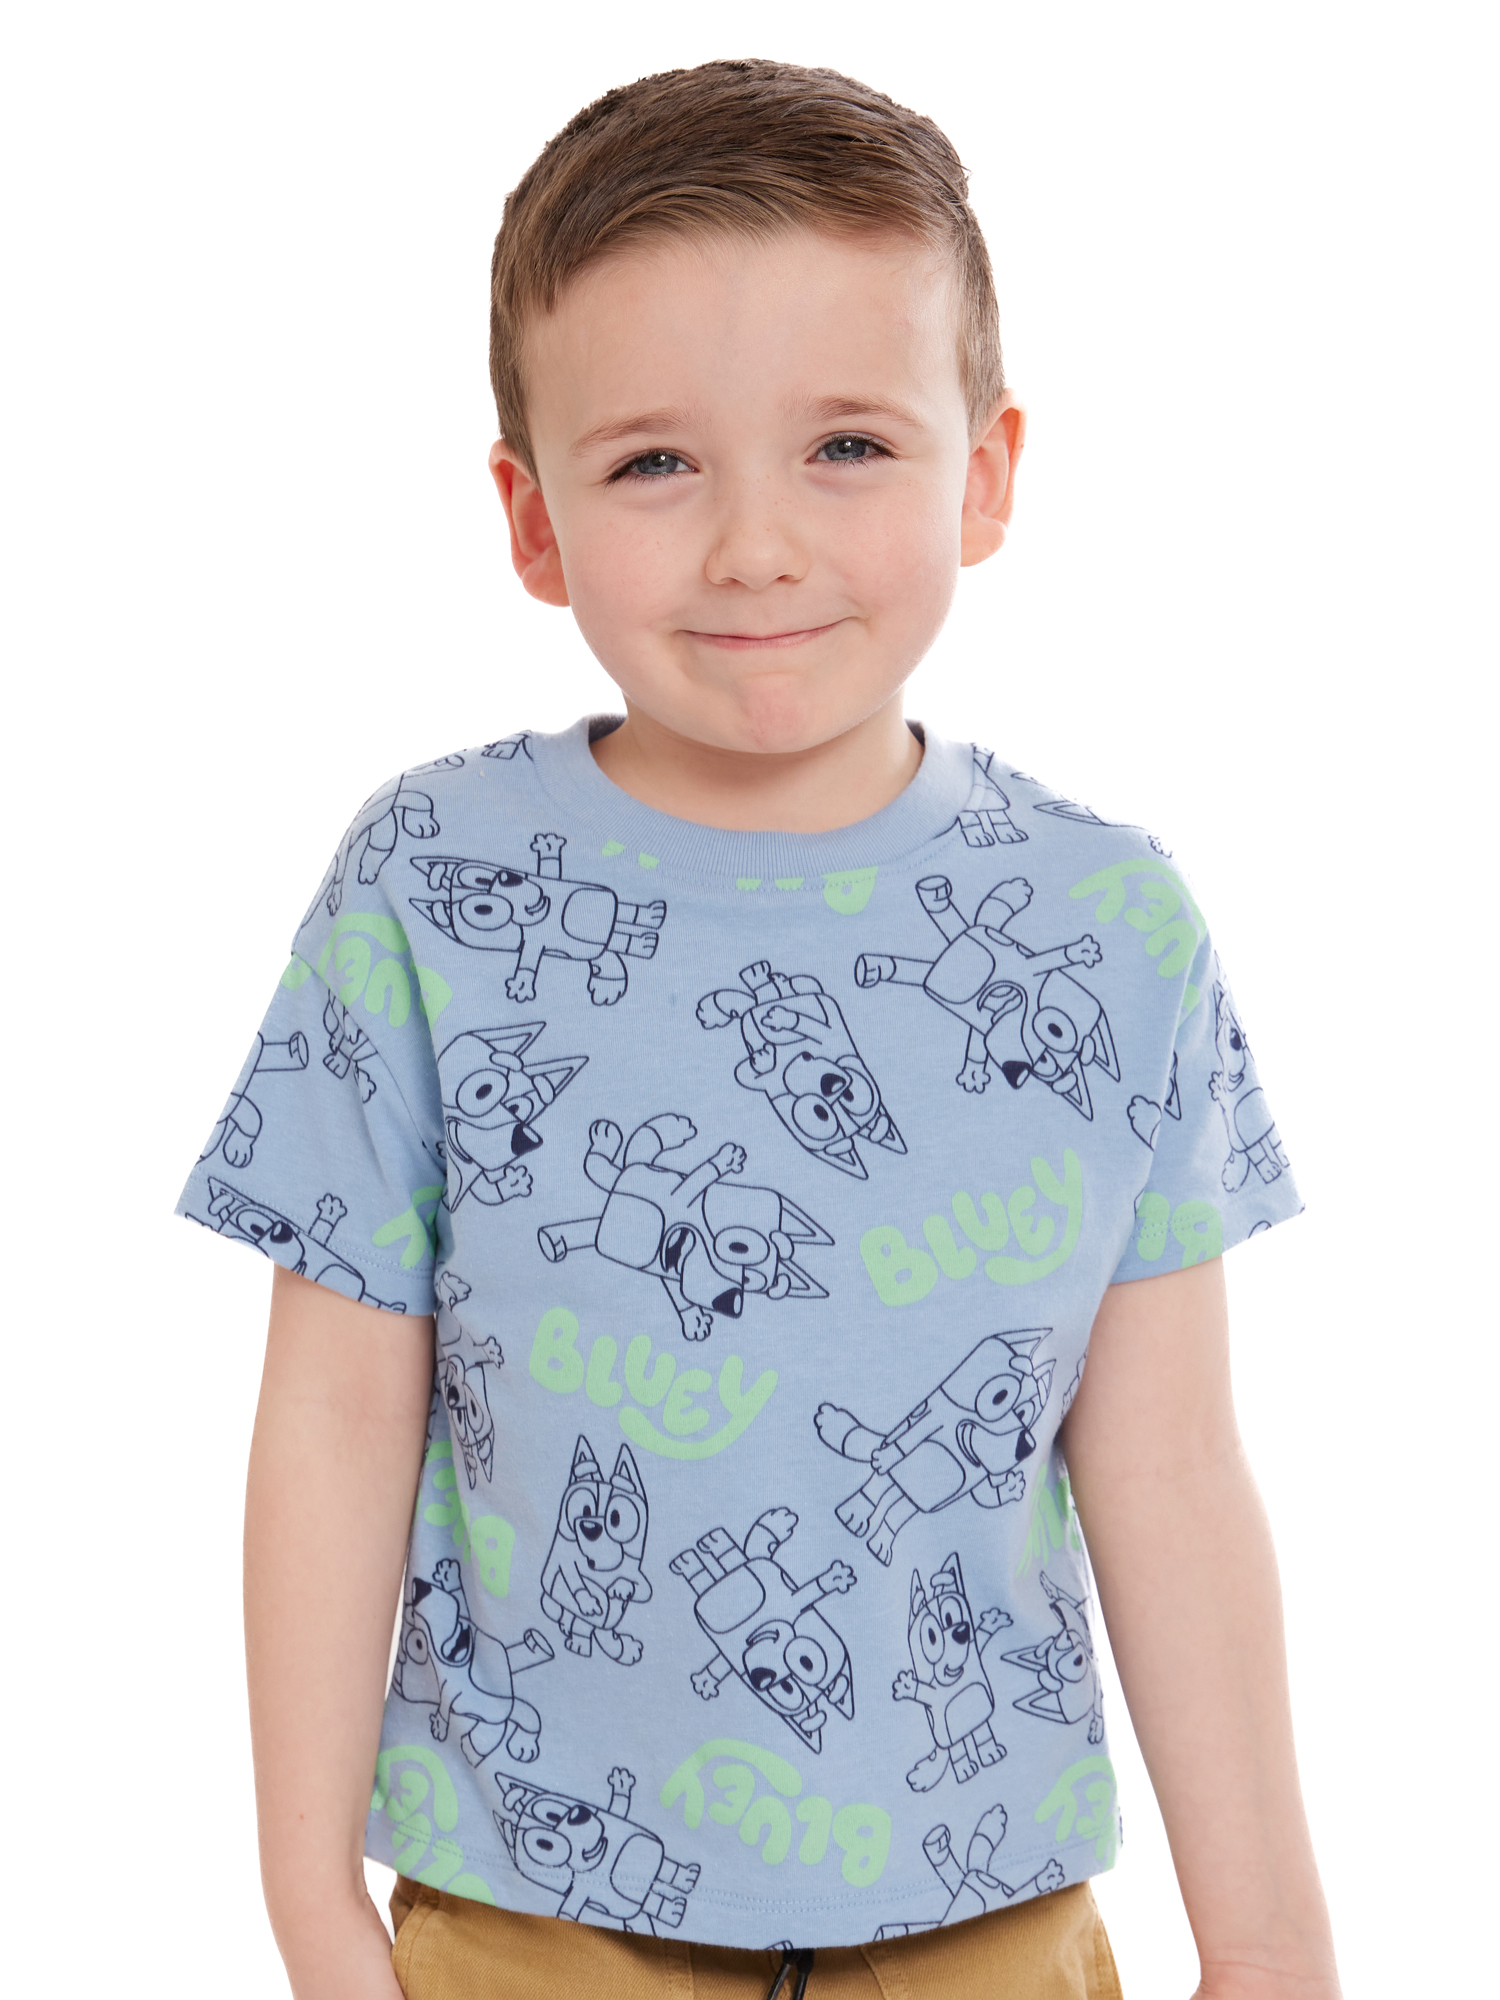 Bluey Toddler Boy Graphic Tees, 2-Pack, Sizes 2T-5T - image 3 of 7